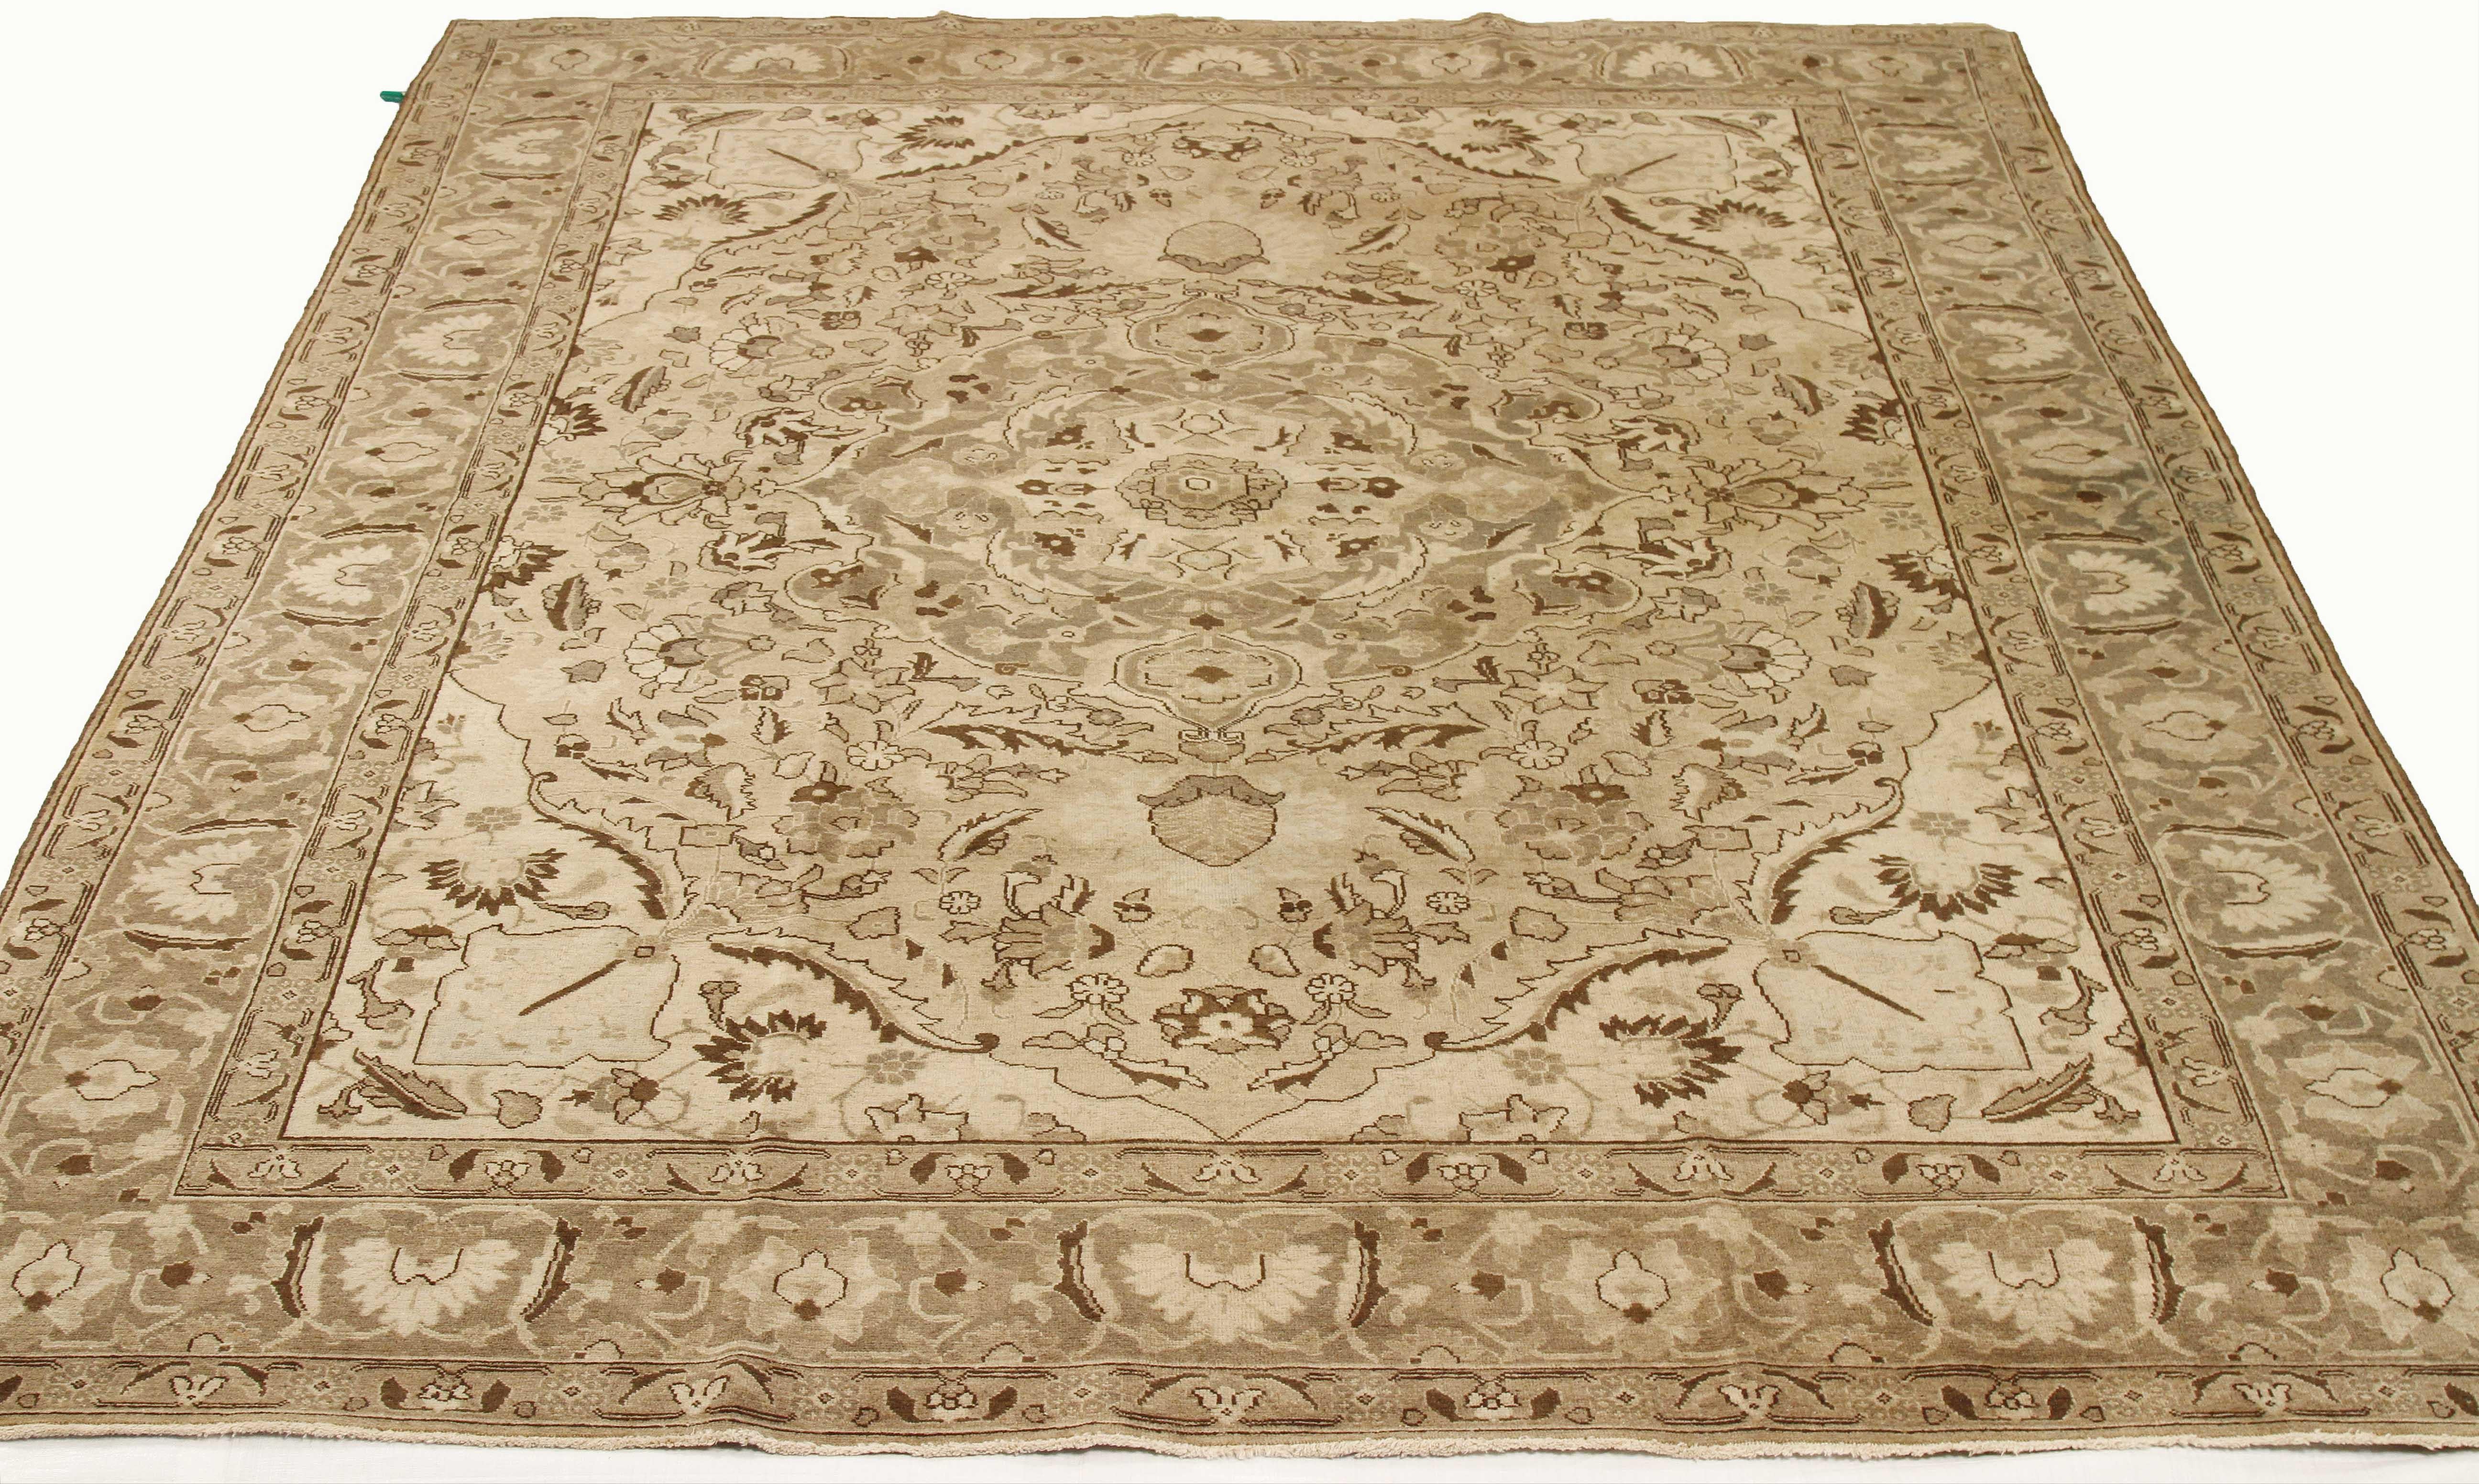 Antique Persian rug handwoven from the finest sheep’s wool and colored with all-natural vegetable dyes that are safe for humans and pets. It’s a traditional Tabriz weaving featuring brown botanical details over an ivory field. It’s a stunning piece